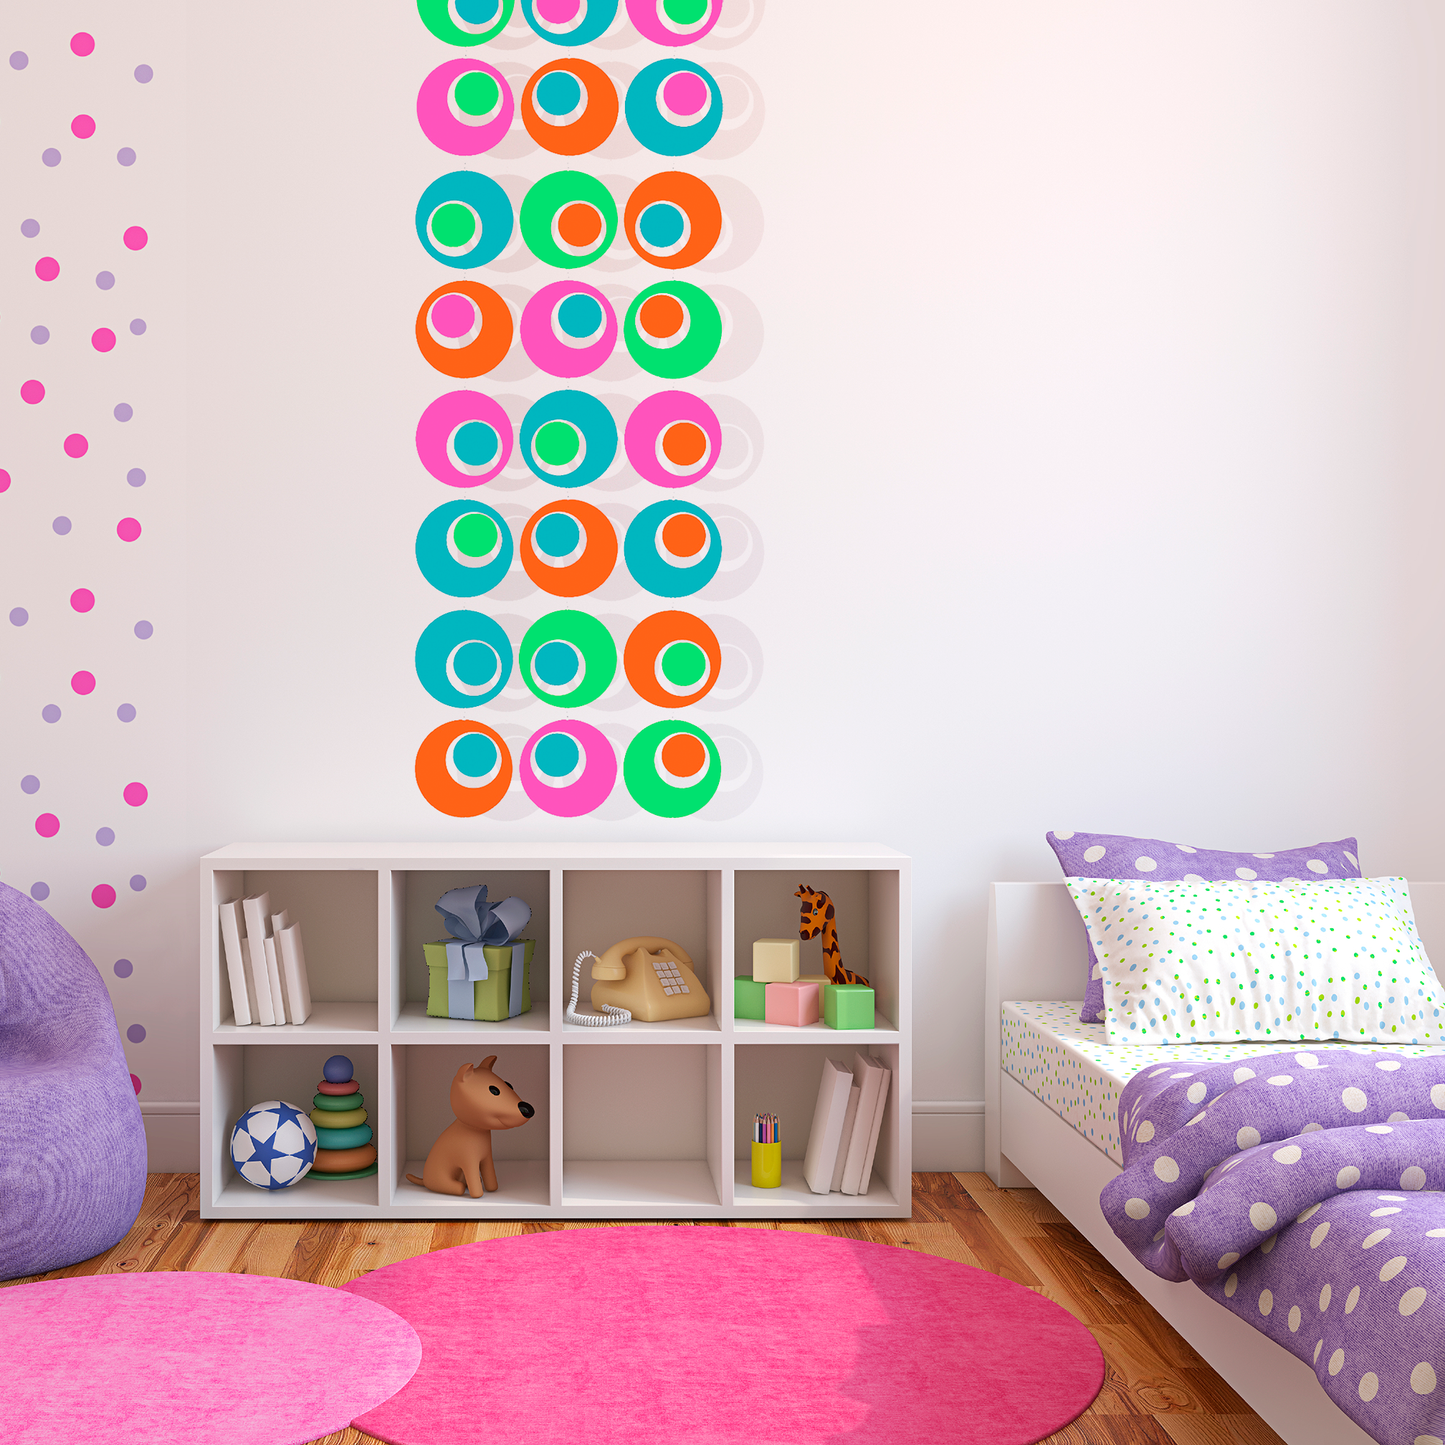 Delightful kid's room with Groovy colorful wall art in orange, hot pink, lime green, and aqua blue, with bed, hot pink rugs and polka dot theme - kinetic wall art by AtomicMobiles.com